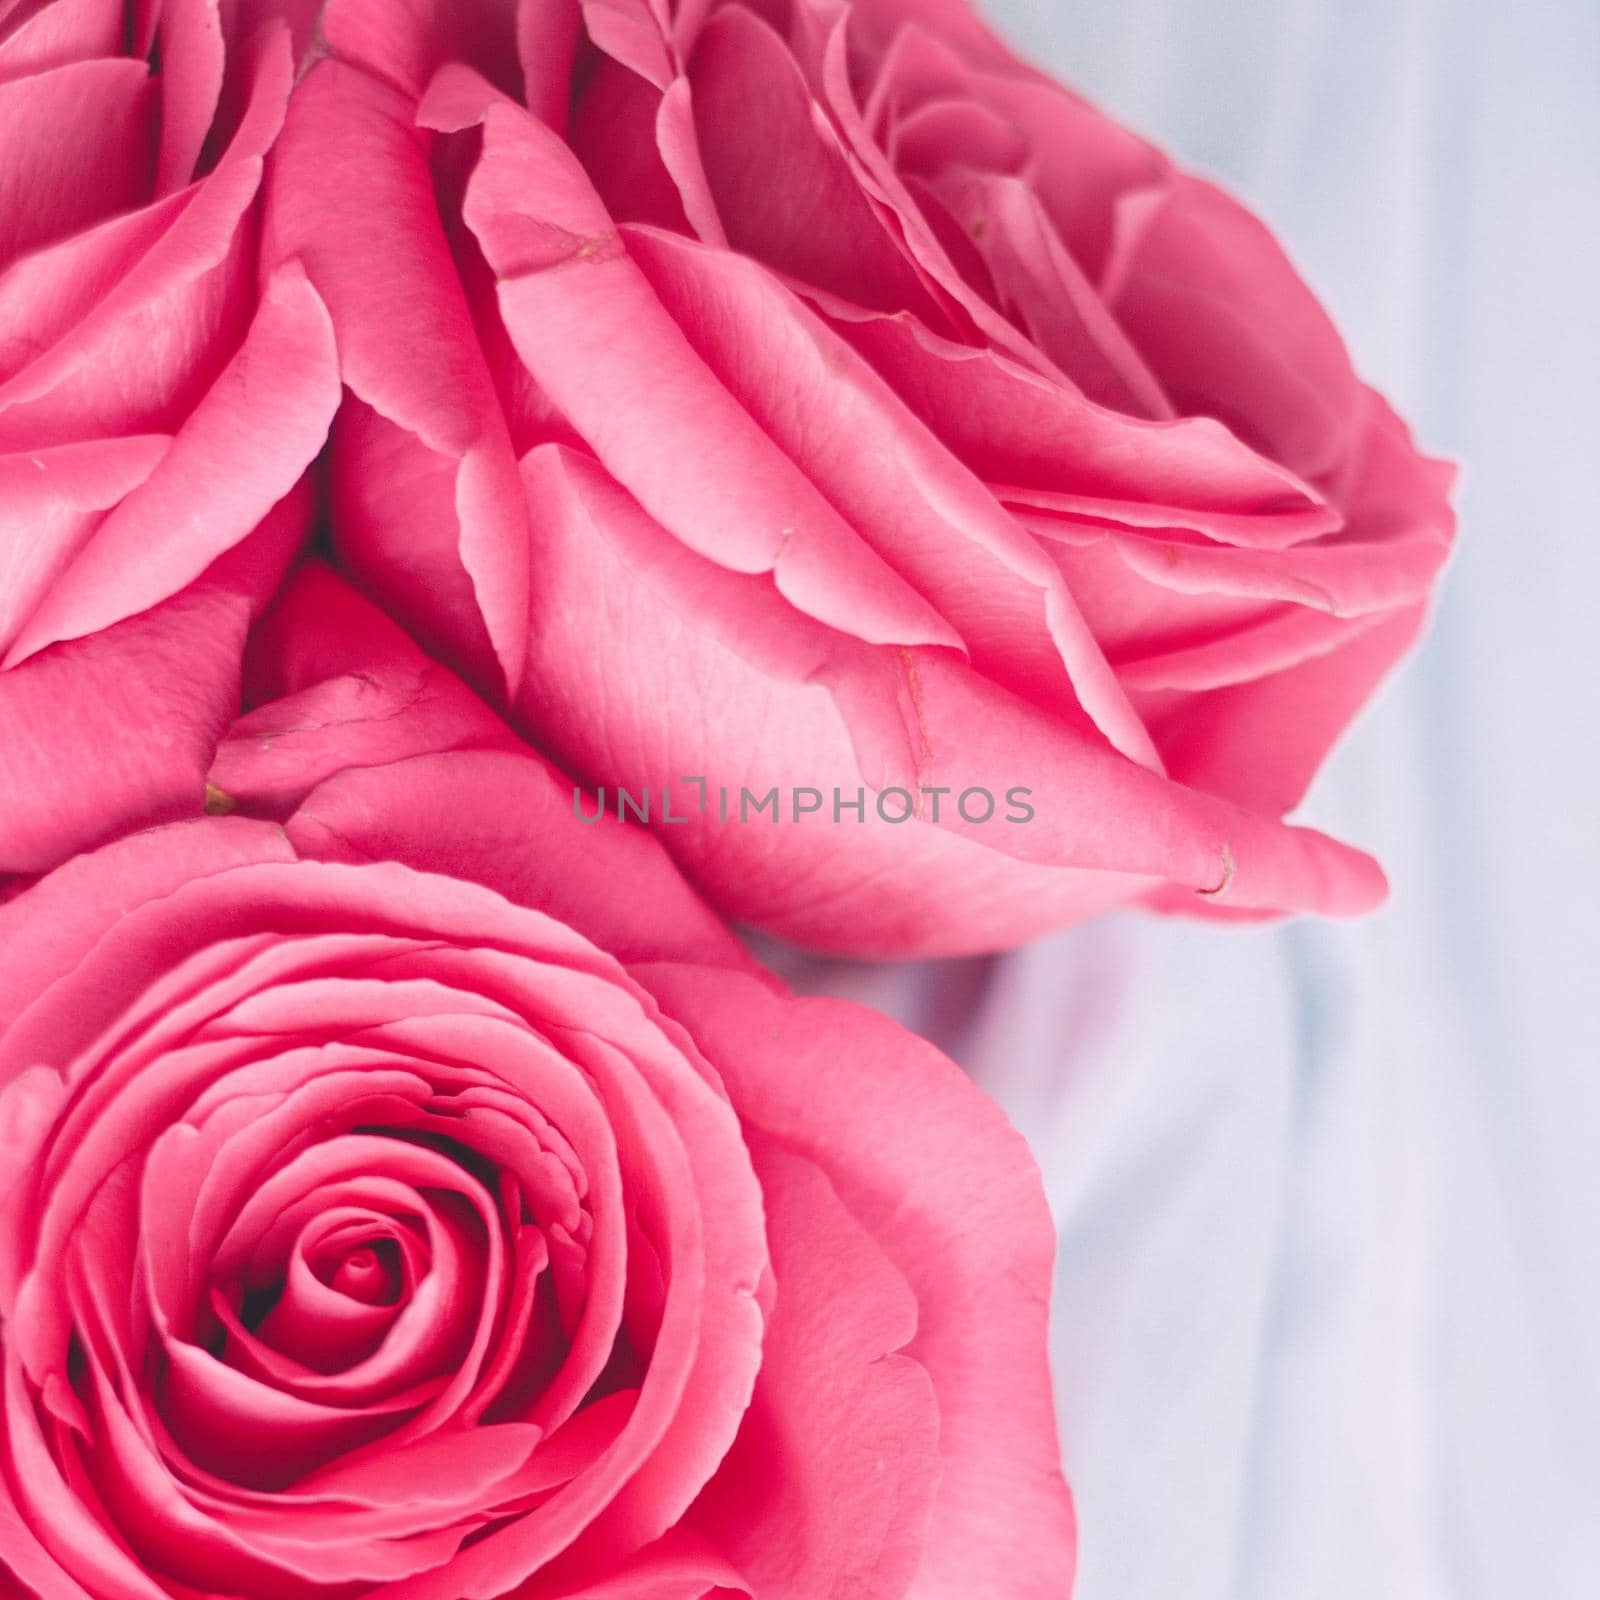 rose flower blossom - wedding, holiday and floral garden styled concept by Anneleven